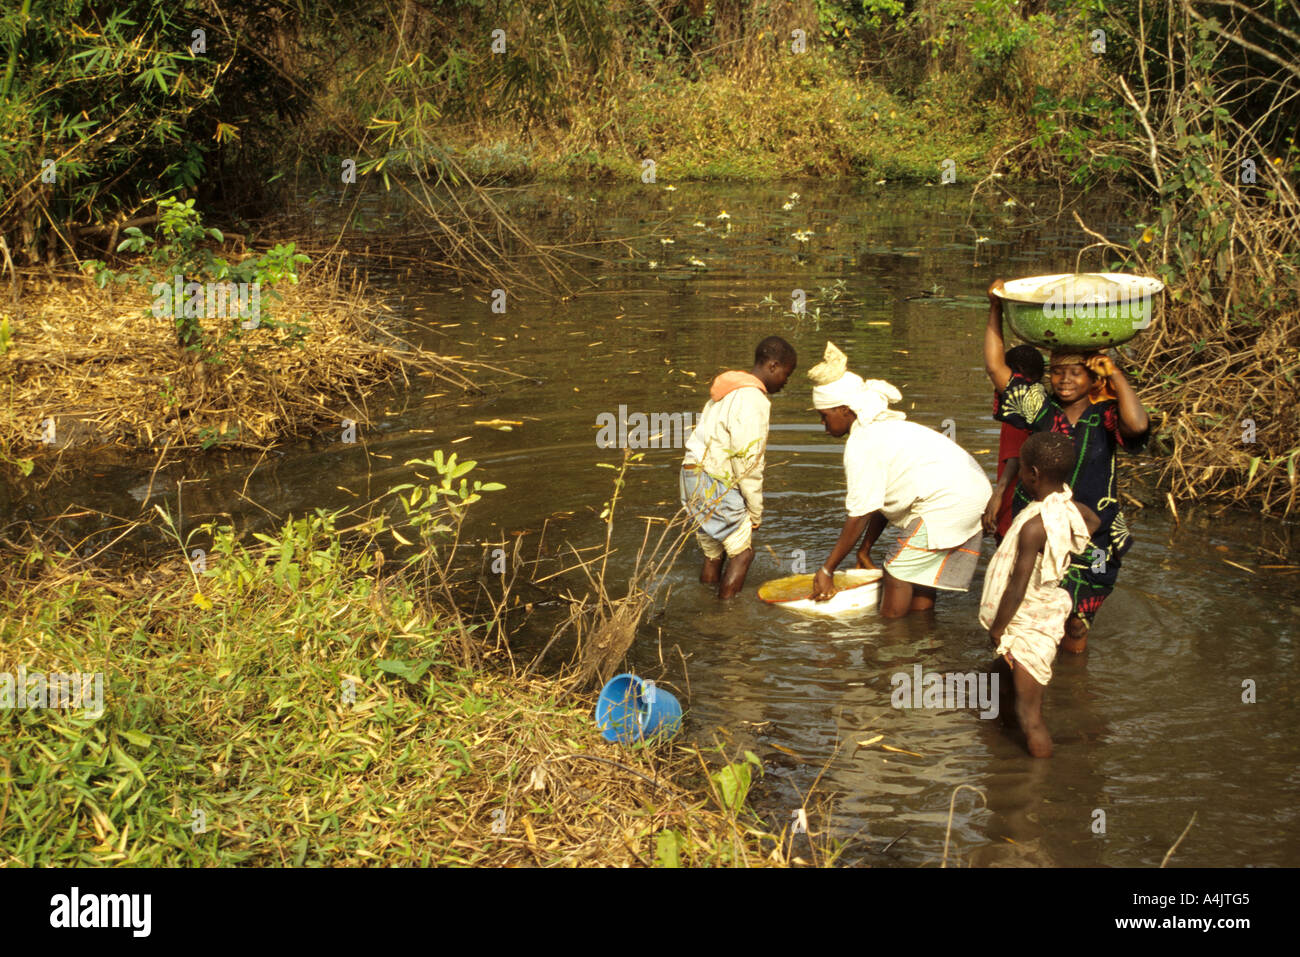 Water Source, Girls Getting Water from Pond, Ivory Coast., Cote d'Ivoire. Stock Photo